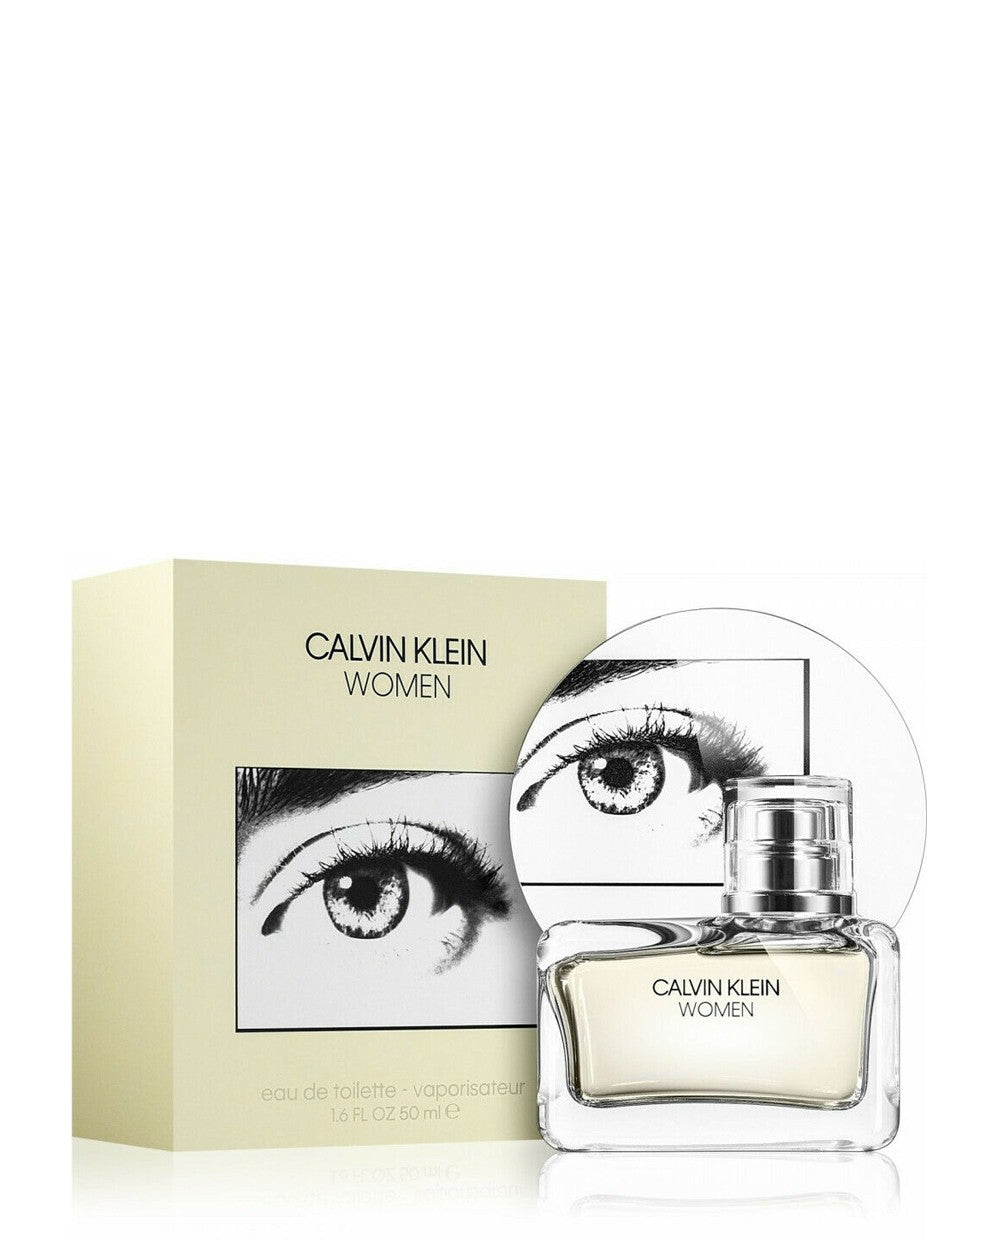 Ripley - CALVIN KLEIN WOMAN EDT FOR HER 100 ML